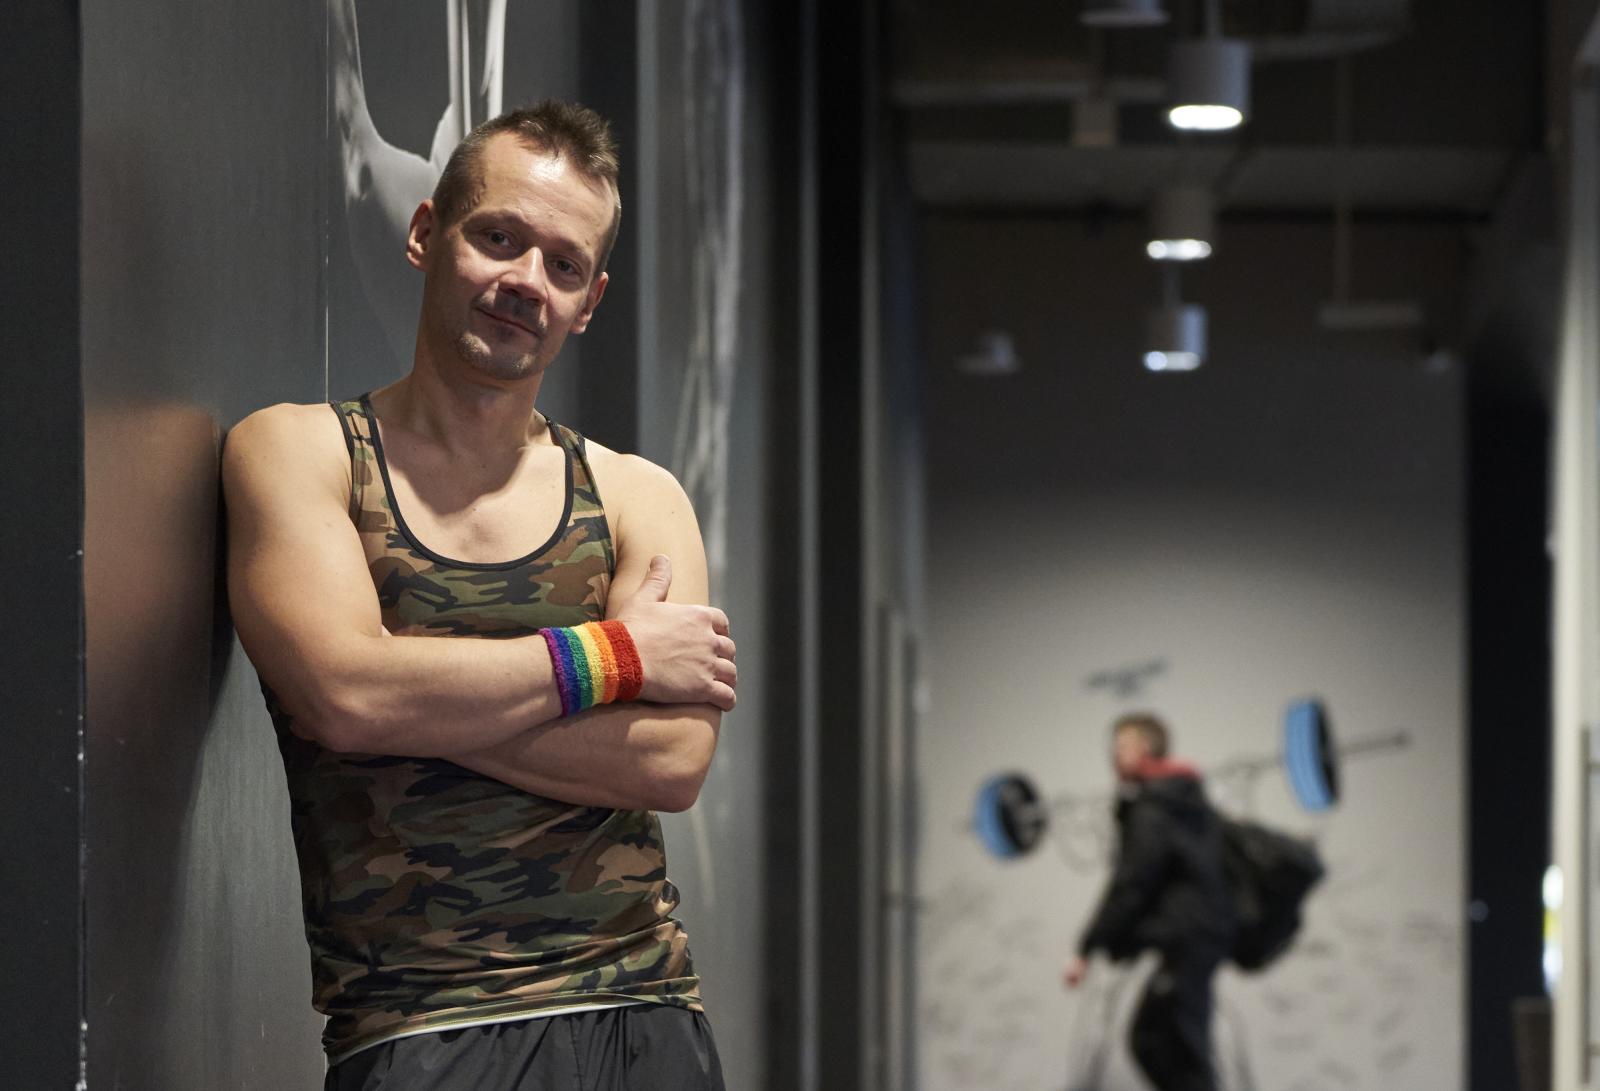 Image from Portraits - Andrzej, Ironman and leader of queer sports group...